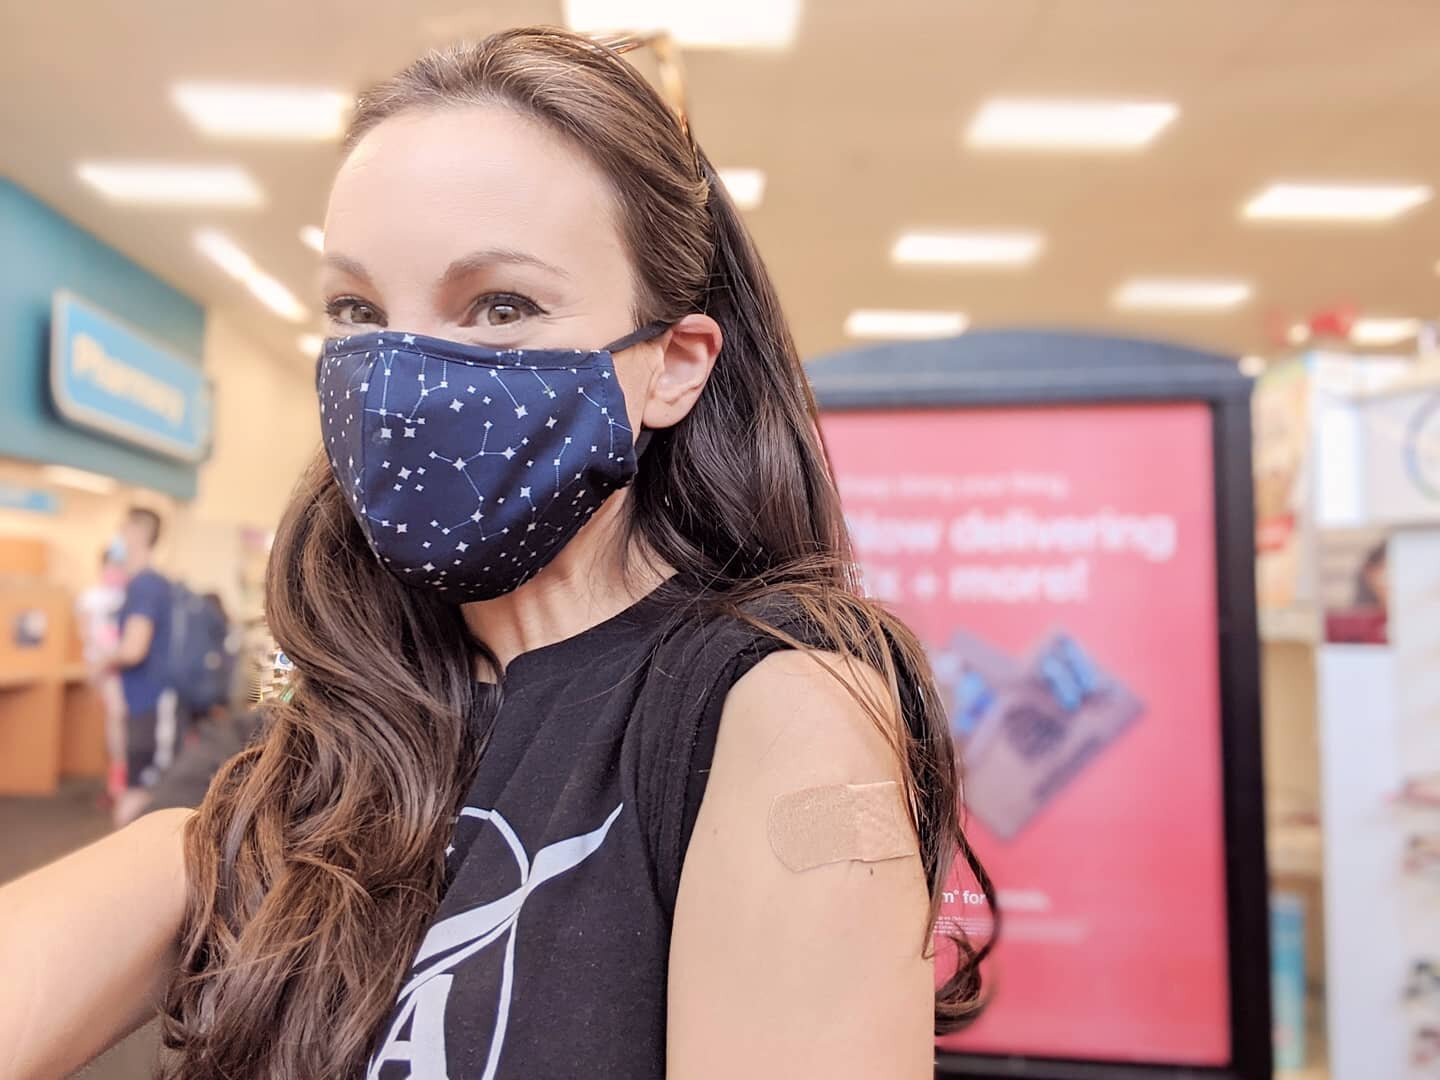 New mask, new immunity, who this?

Don't forget to get your flu shot! 

We just stopped by our local @cvspharmacy and it took ~10 minutes. They also gave us each a coupon for $5 off $20 for getting our flu shot. Not a bad deal 🙃

Also pretty pumped 